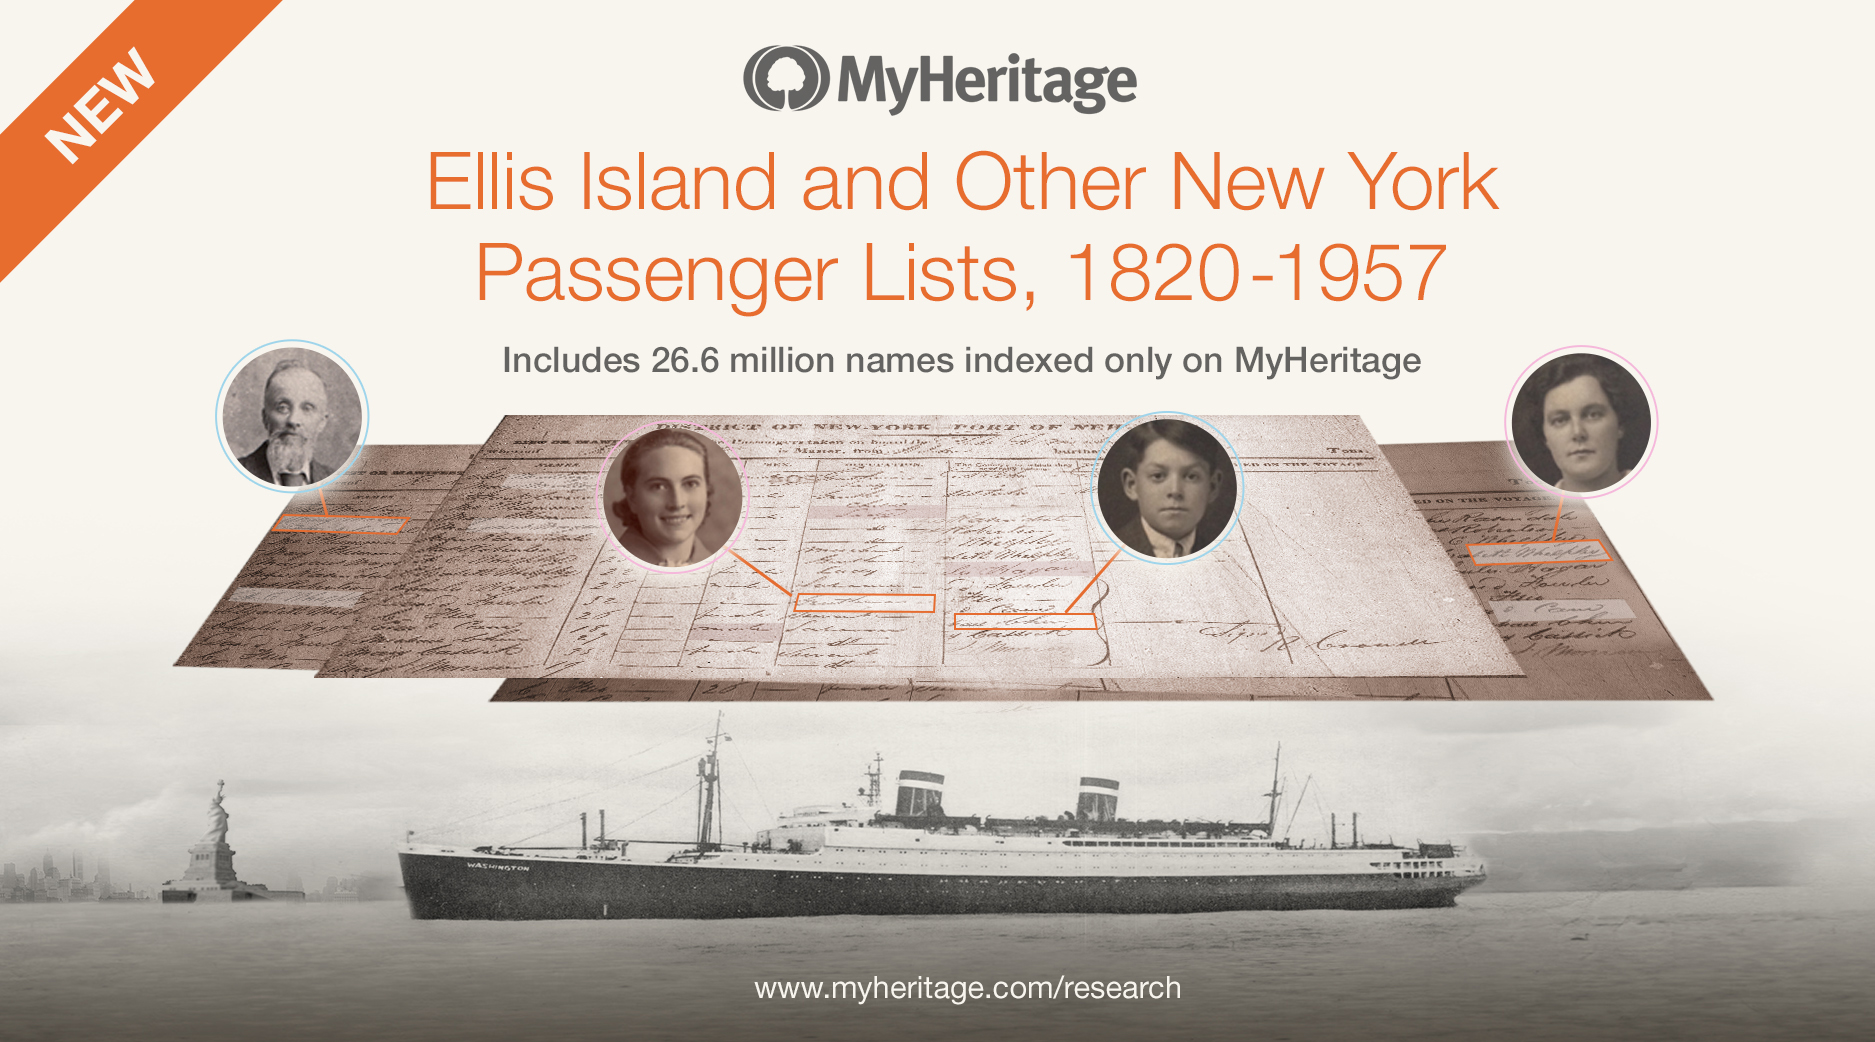 New: Ellis Island and other New York Passenger Lists